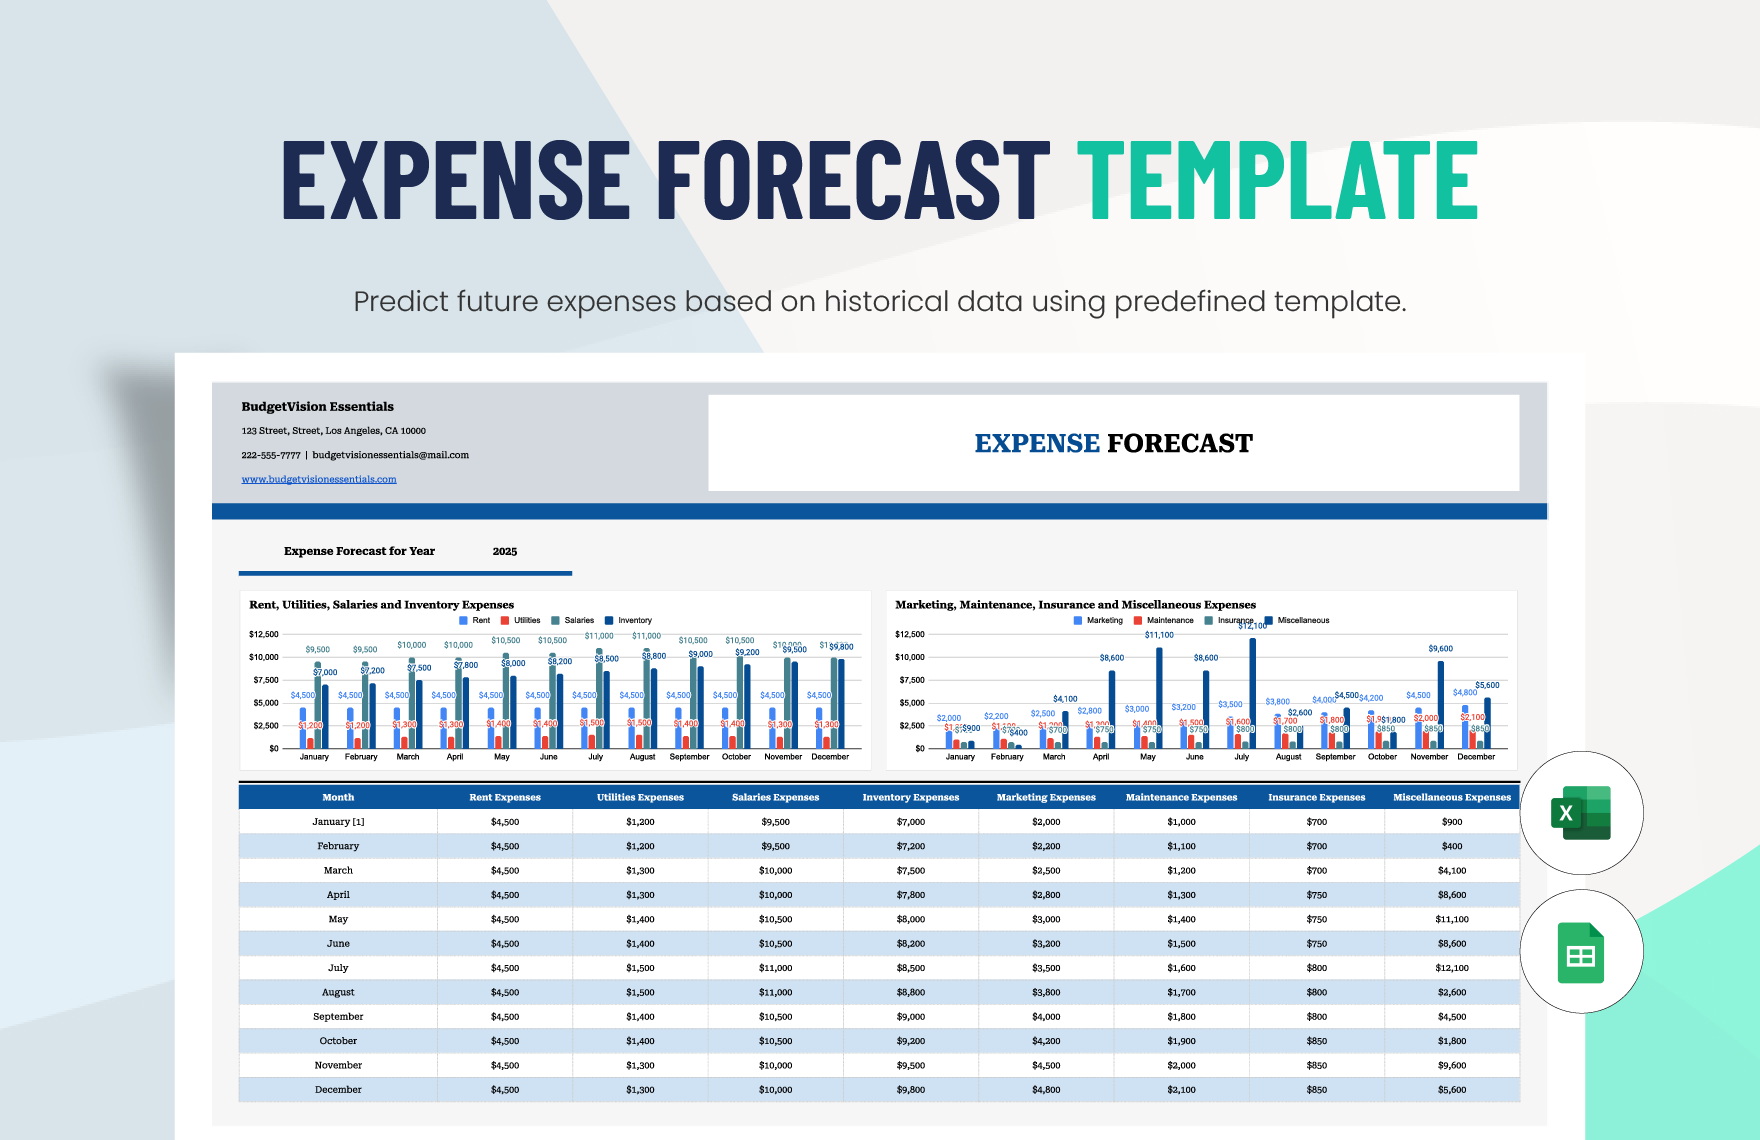 Expense Forecast Template in Excel, Google Sheets